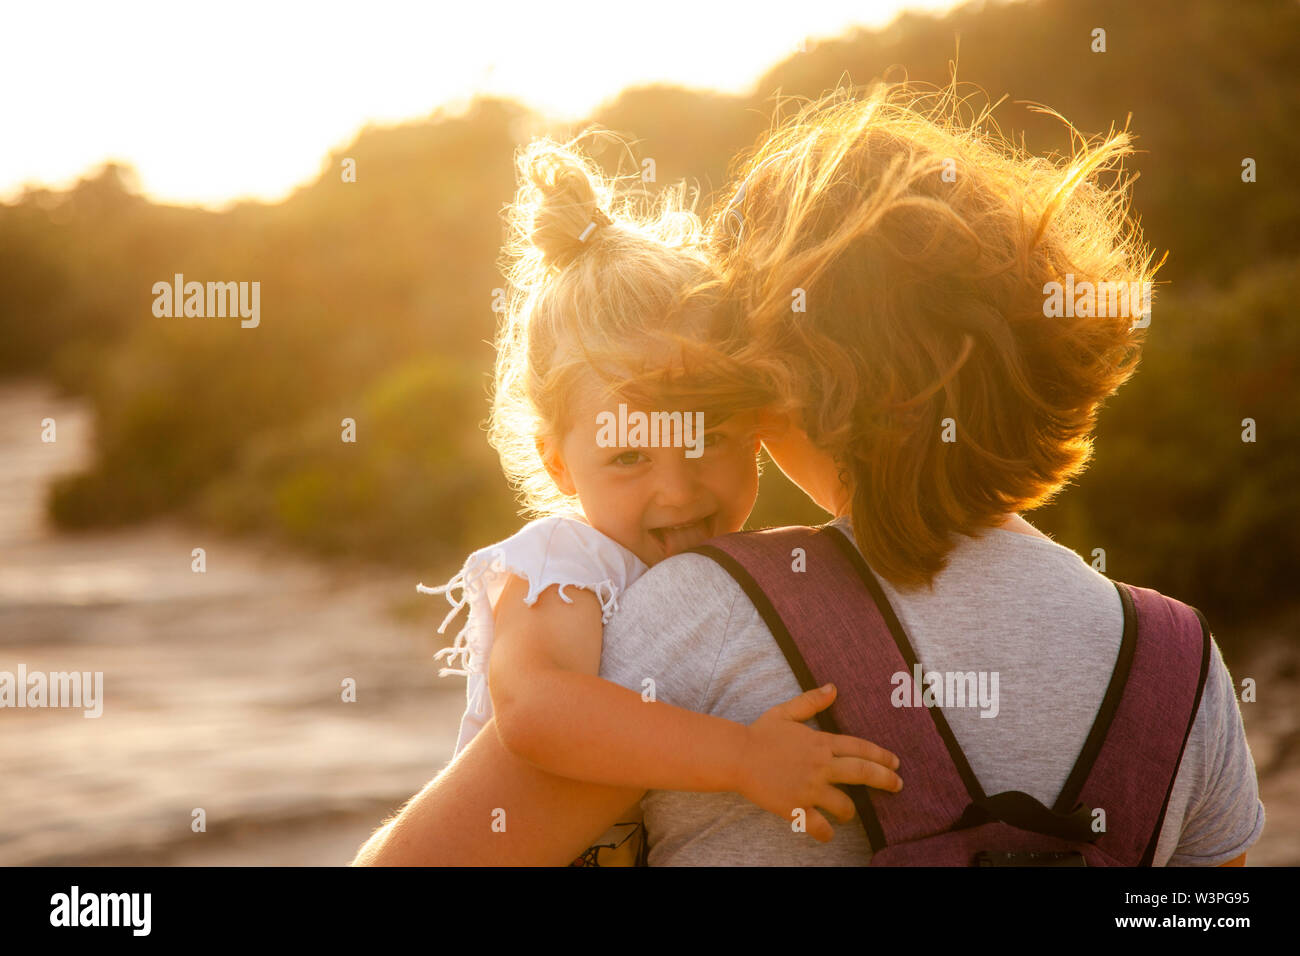 portrait of a 3 year old Caucasian girl with blond hair who shows her tongue playfully. In the arms of the mother, backlit image at sunset. Stock Photo